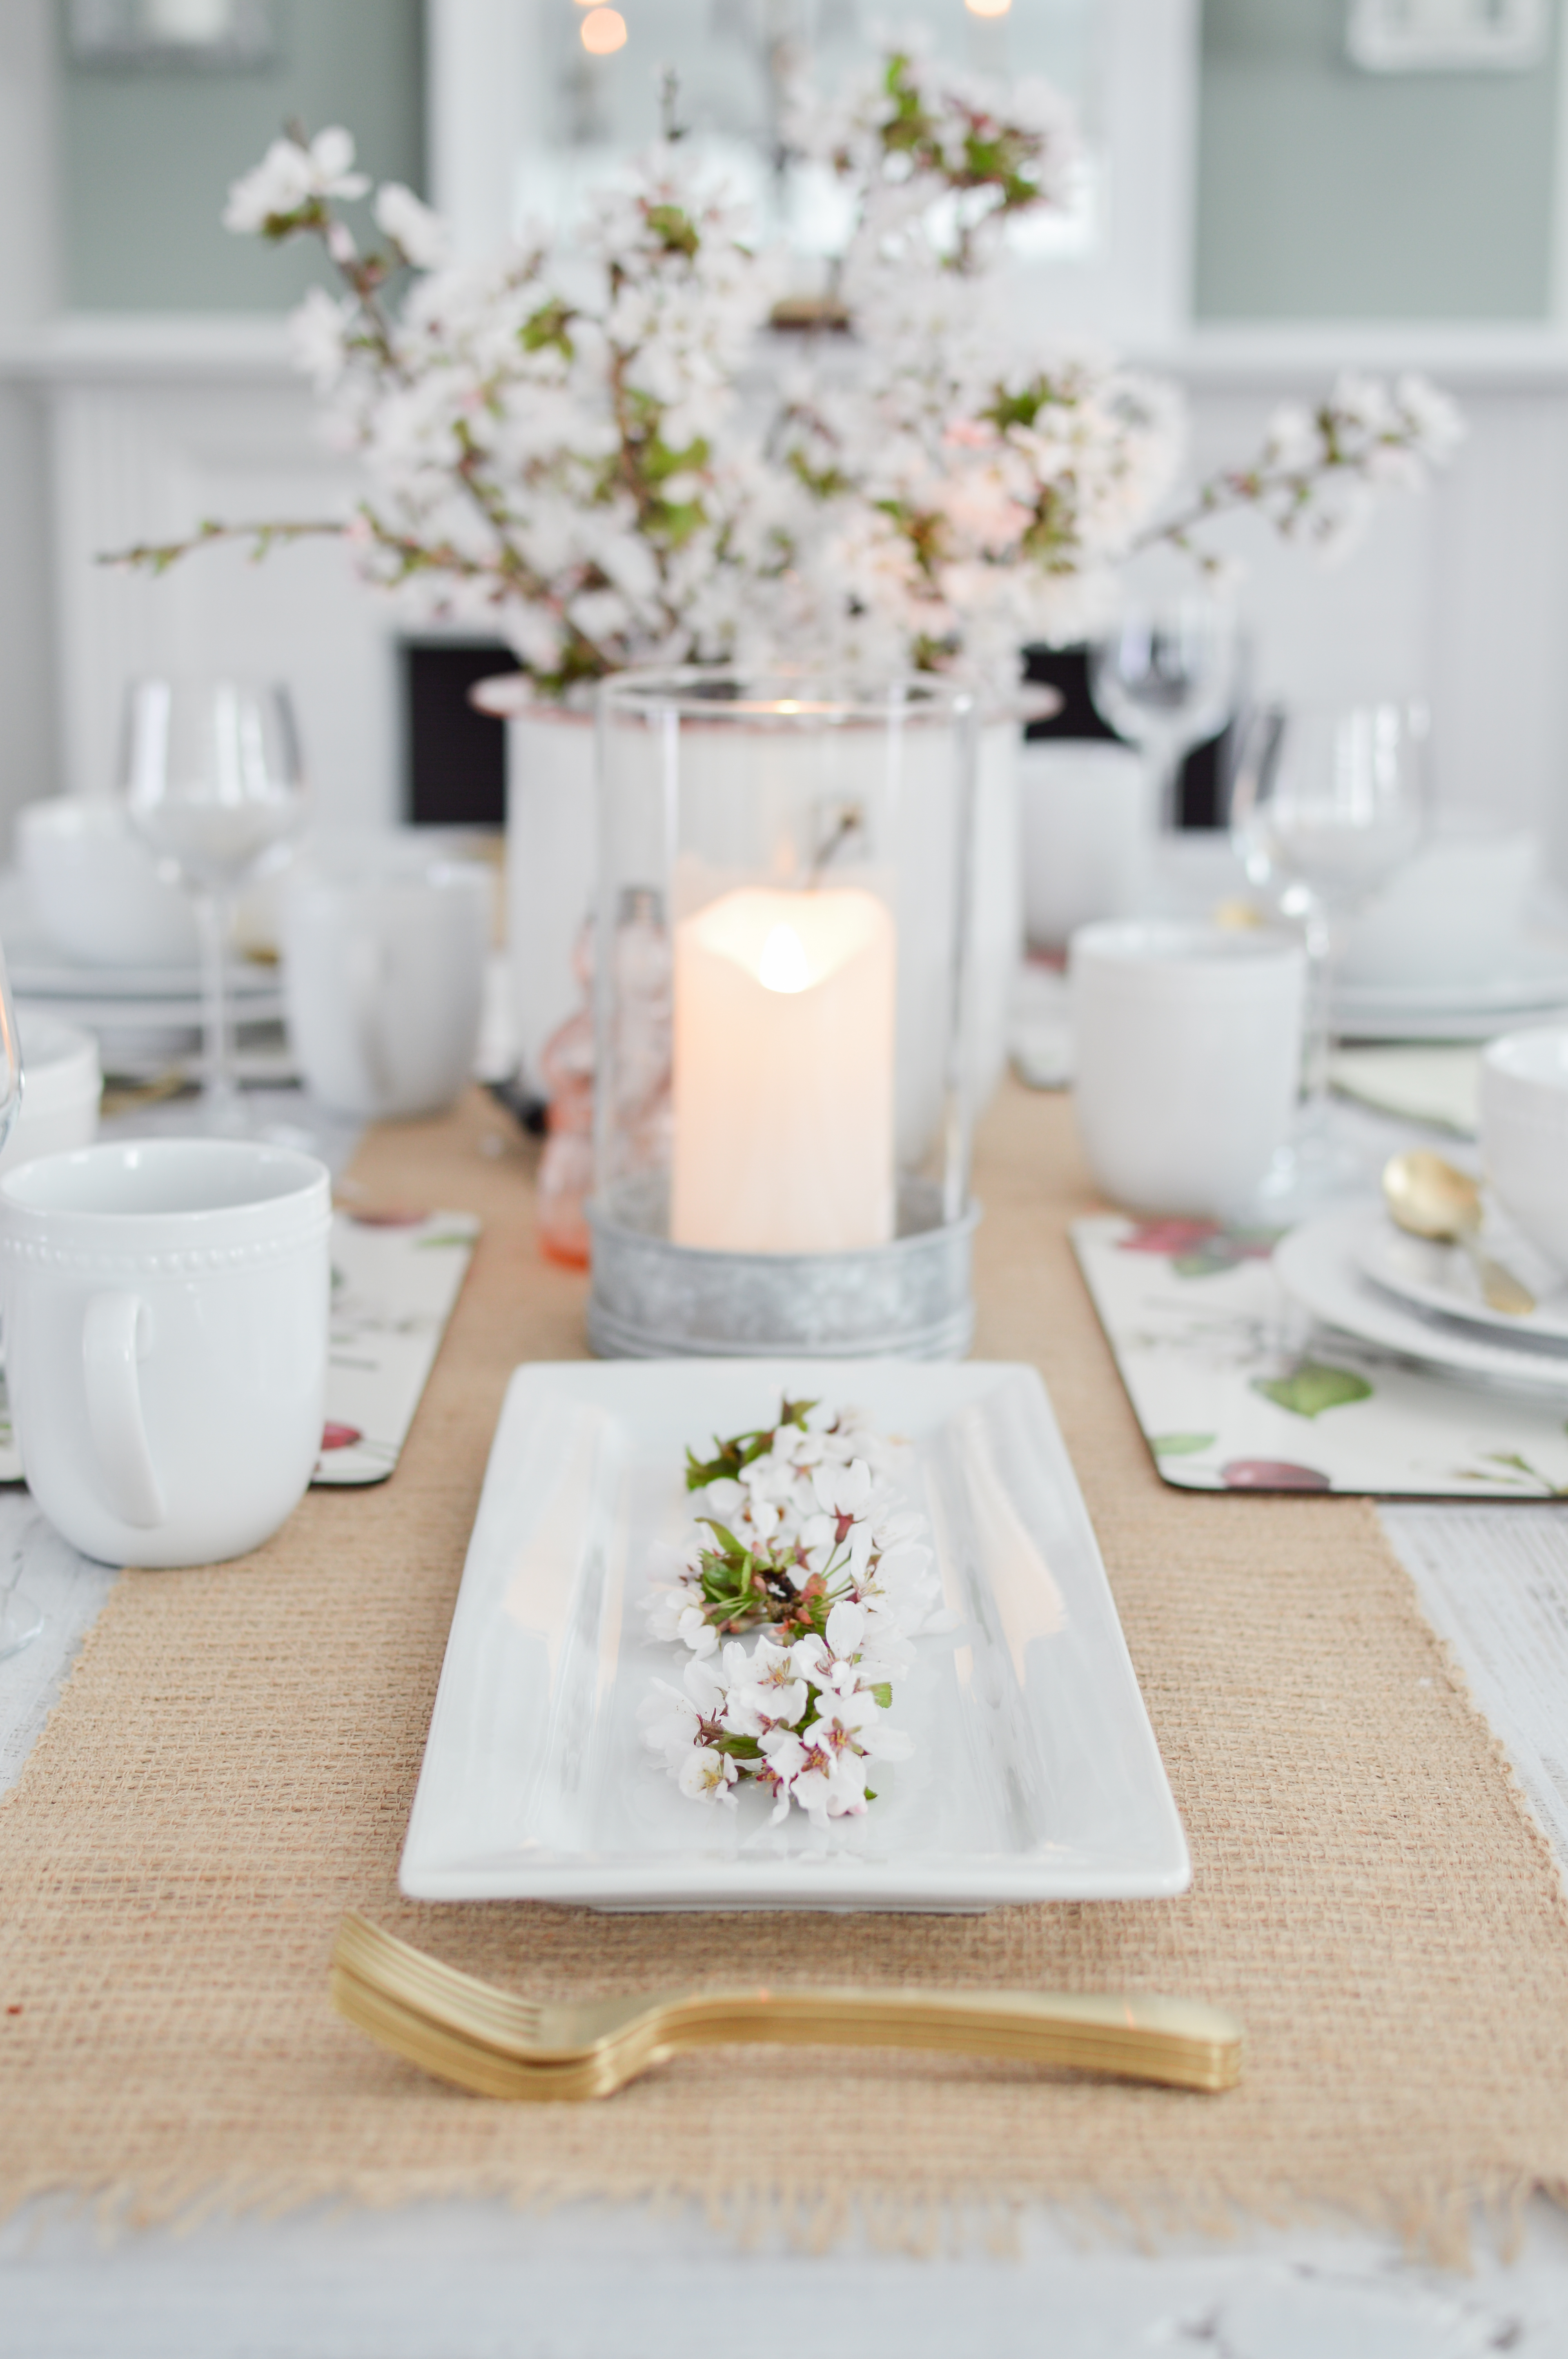 Cottage Farmhouse Farm Table Setting with Cherry Blossoms for Spring